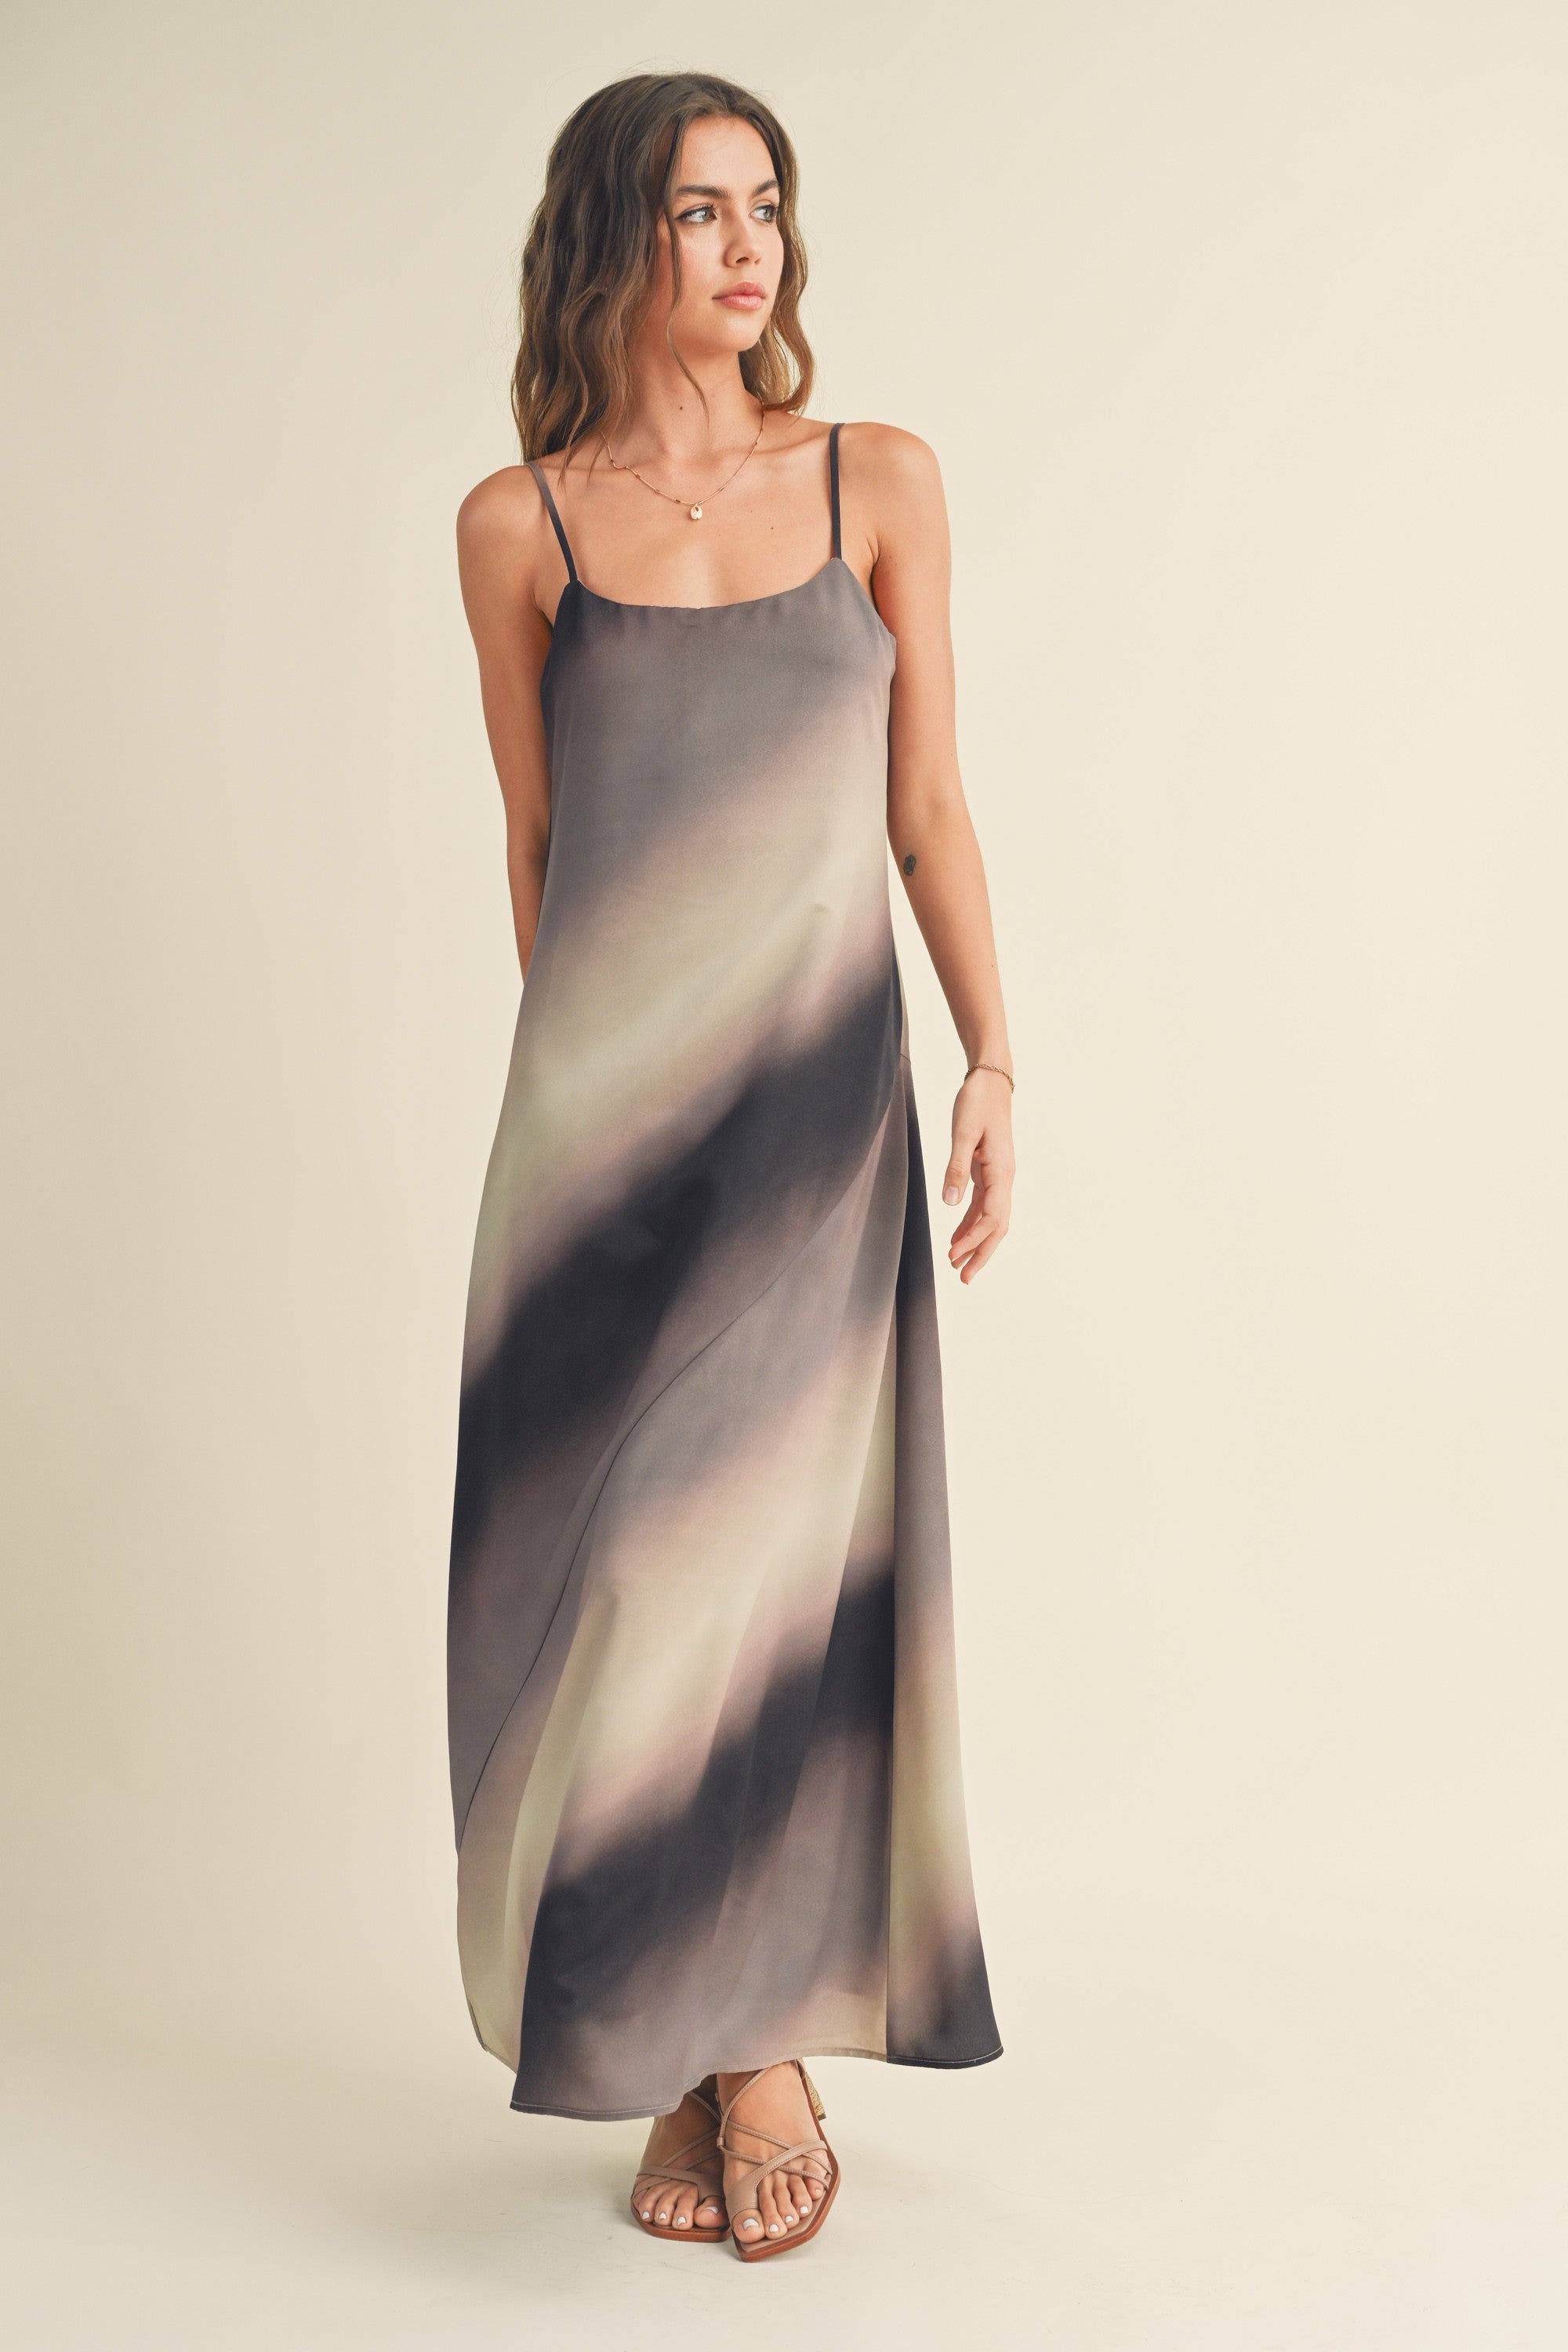 Brushed Color Print Maxi Dress | Collective Request 